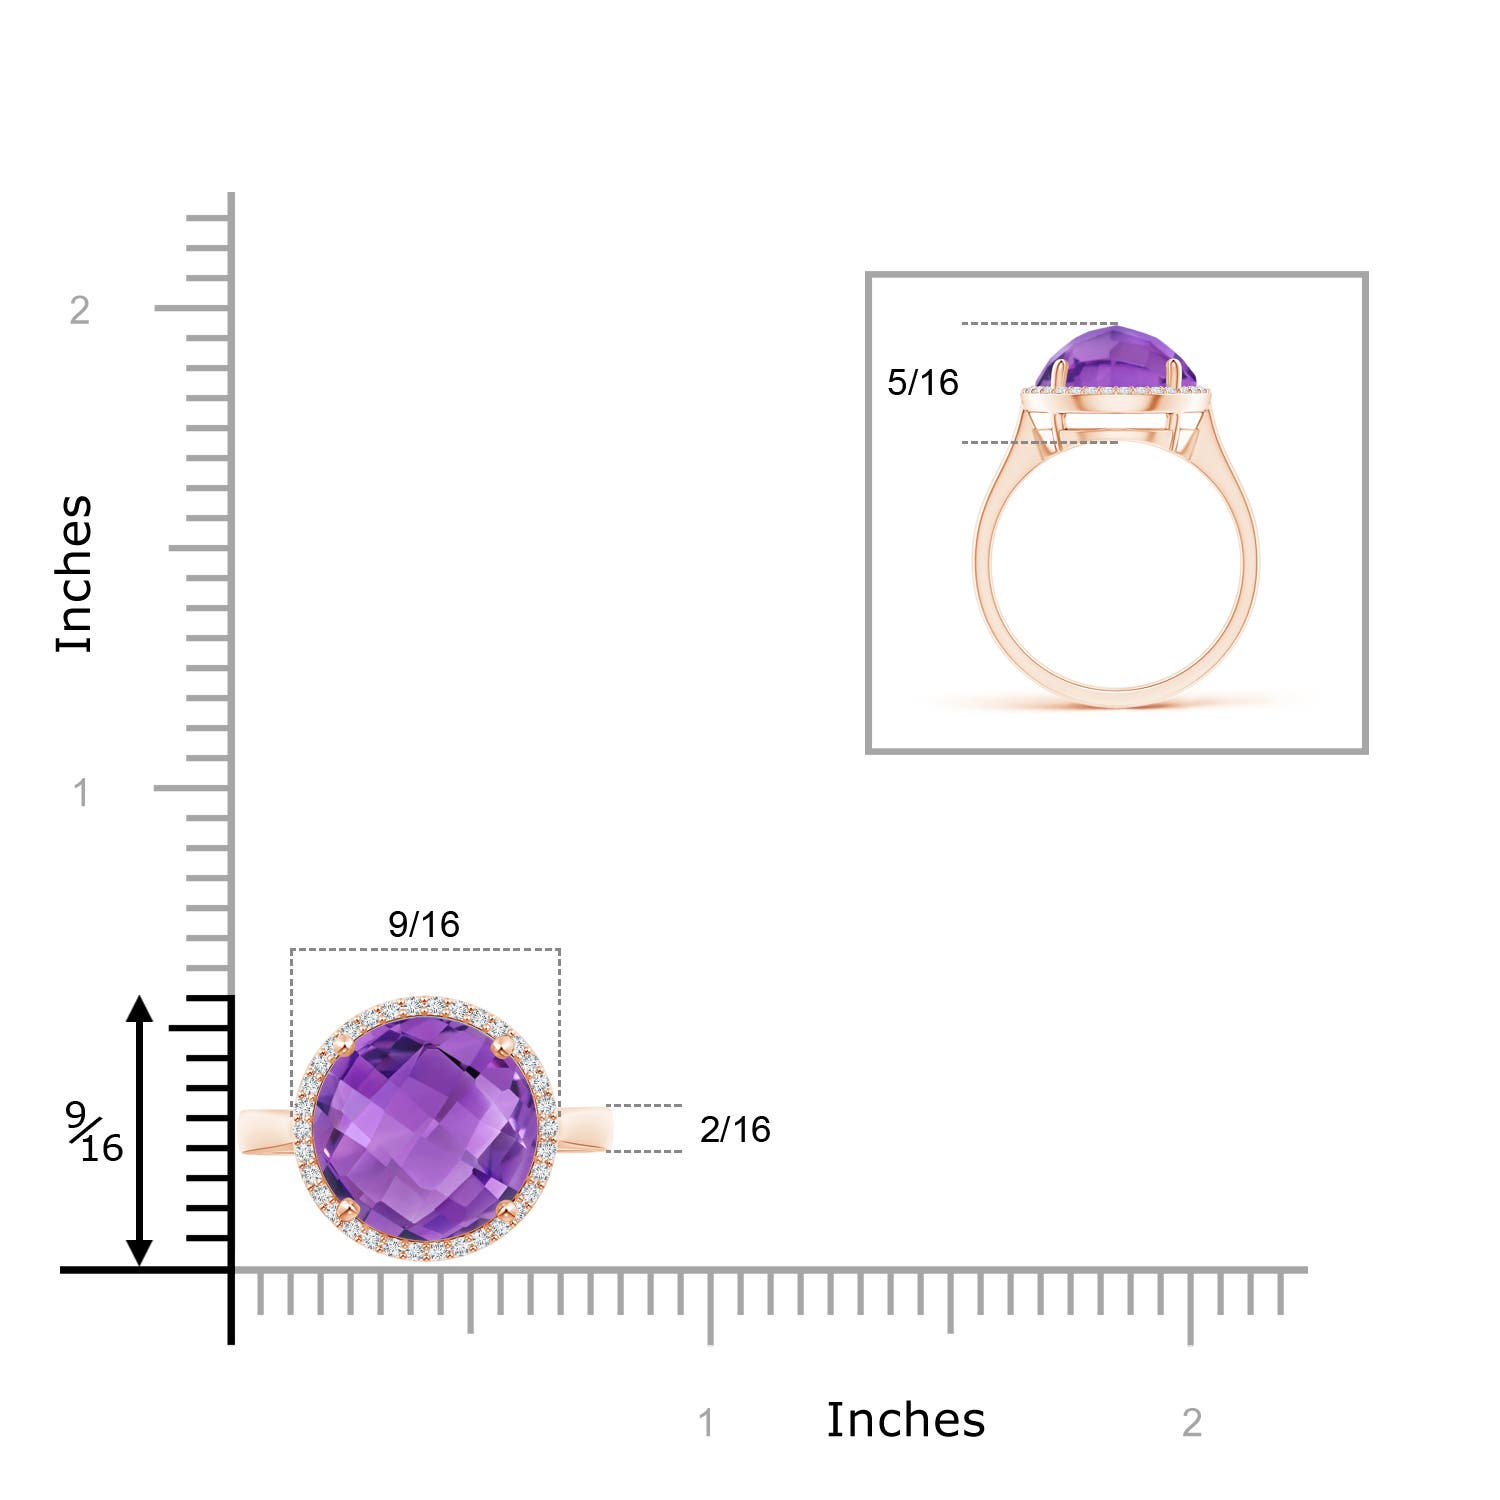 AA - Amethyst / 5.7 CT / 14 KT Rose Gold